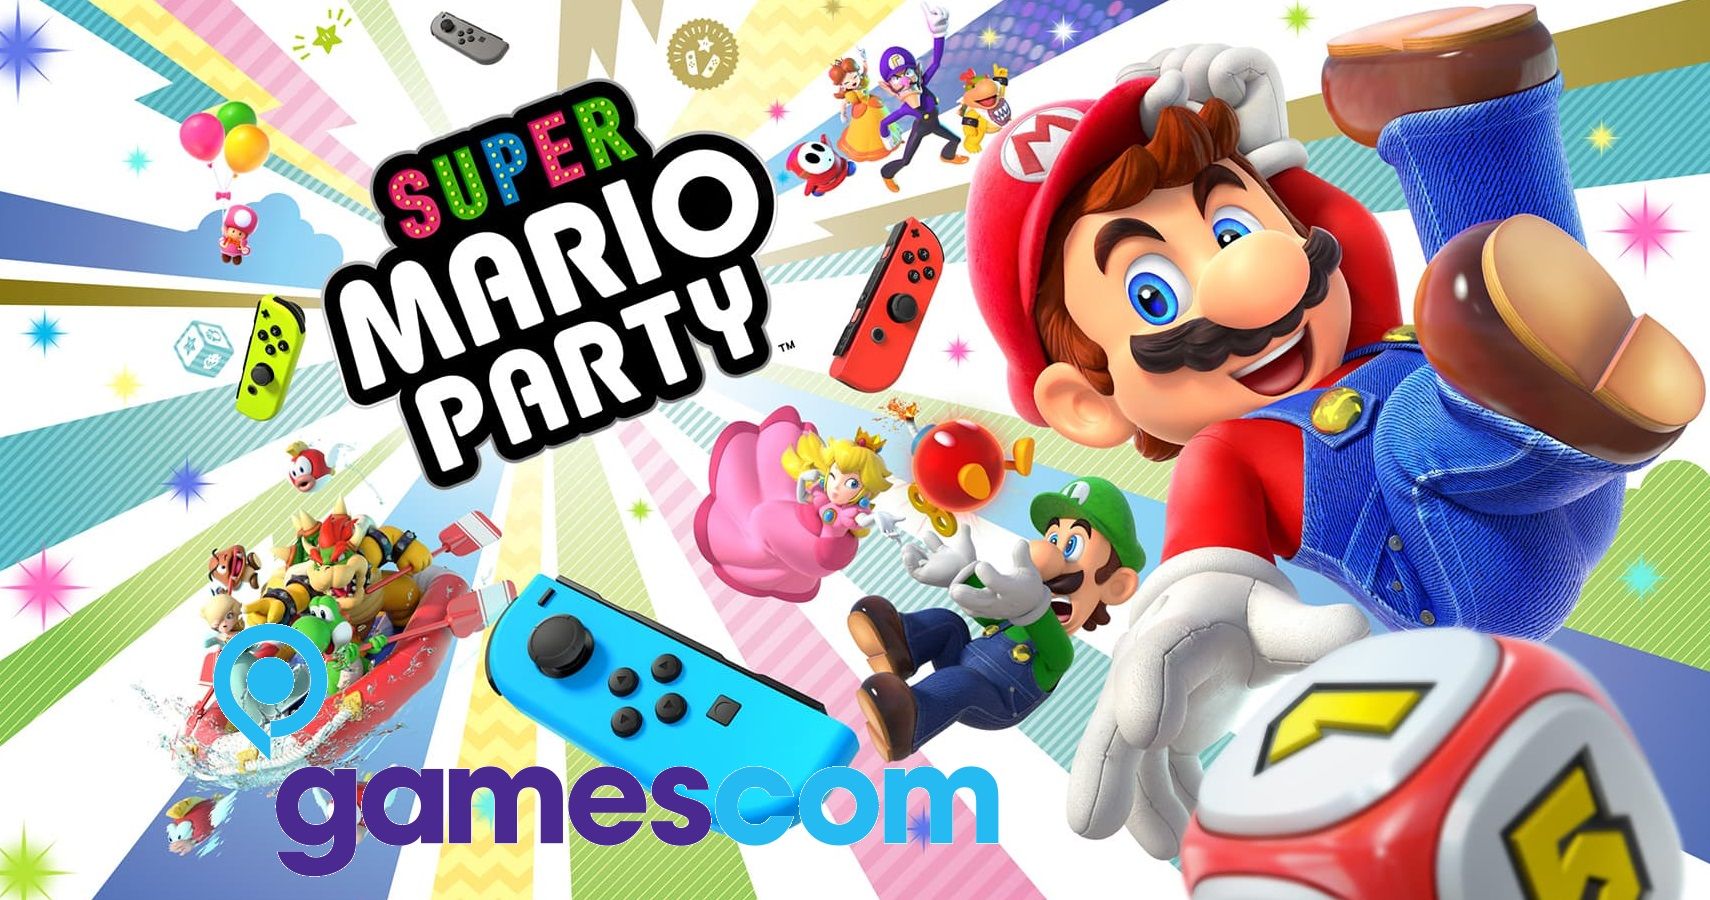 Super Mario Party Will Be Playable For The First Time At Gamescom